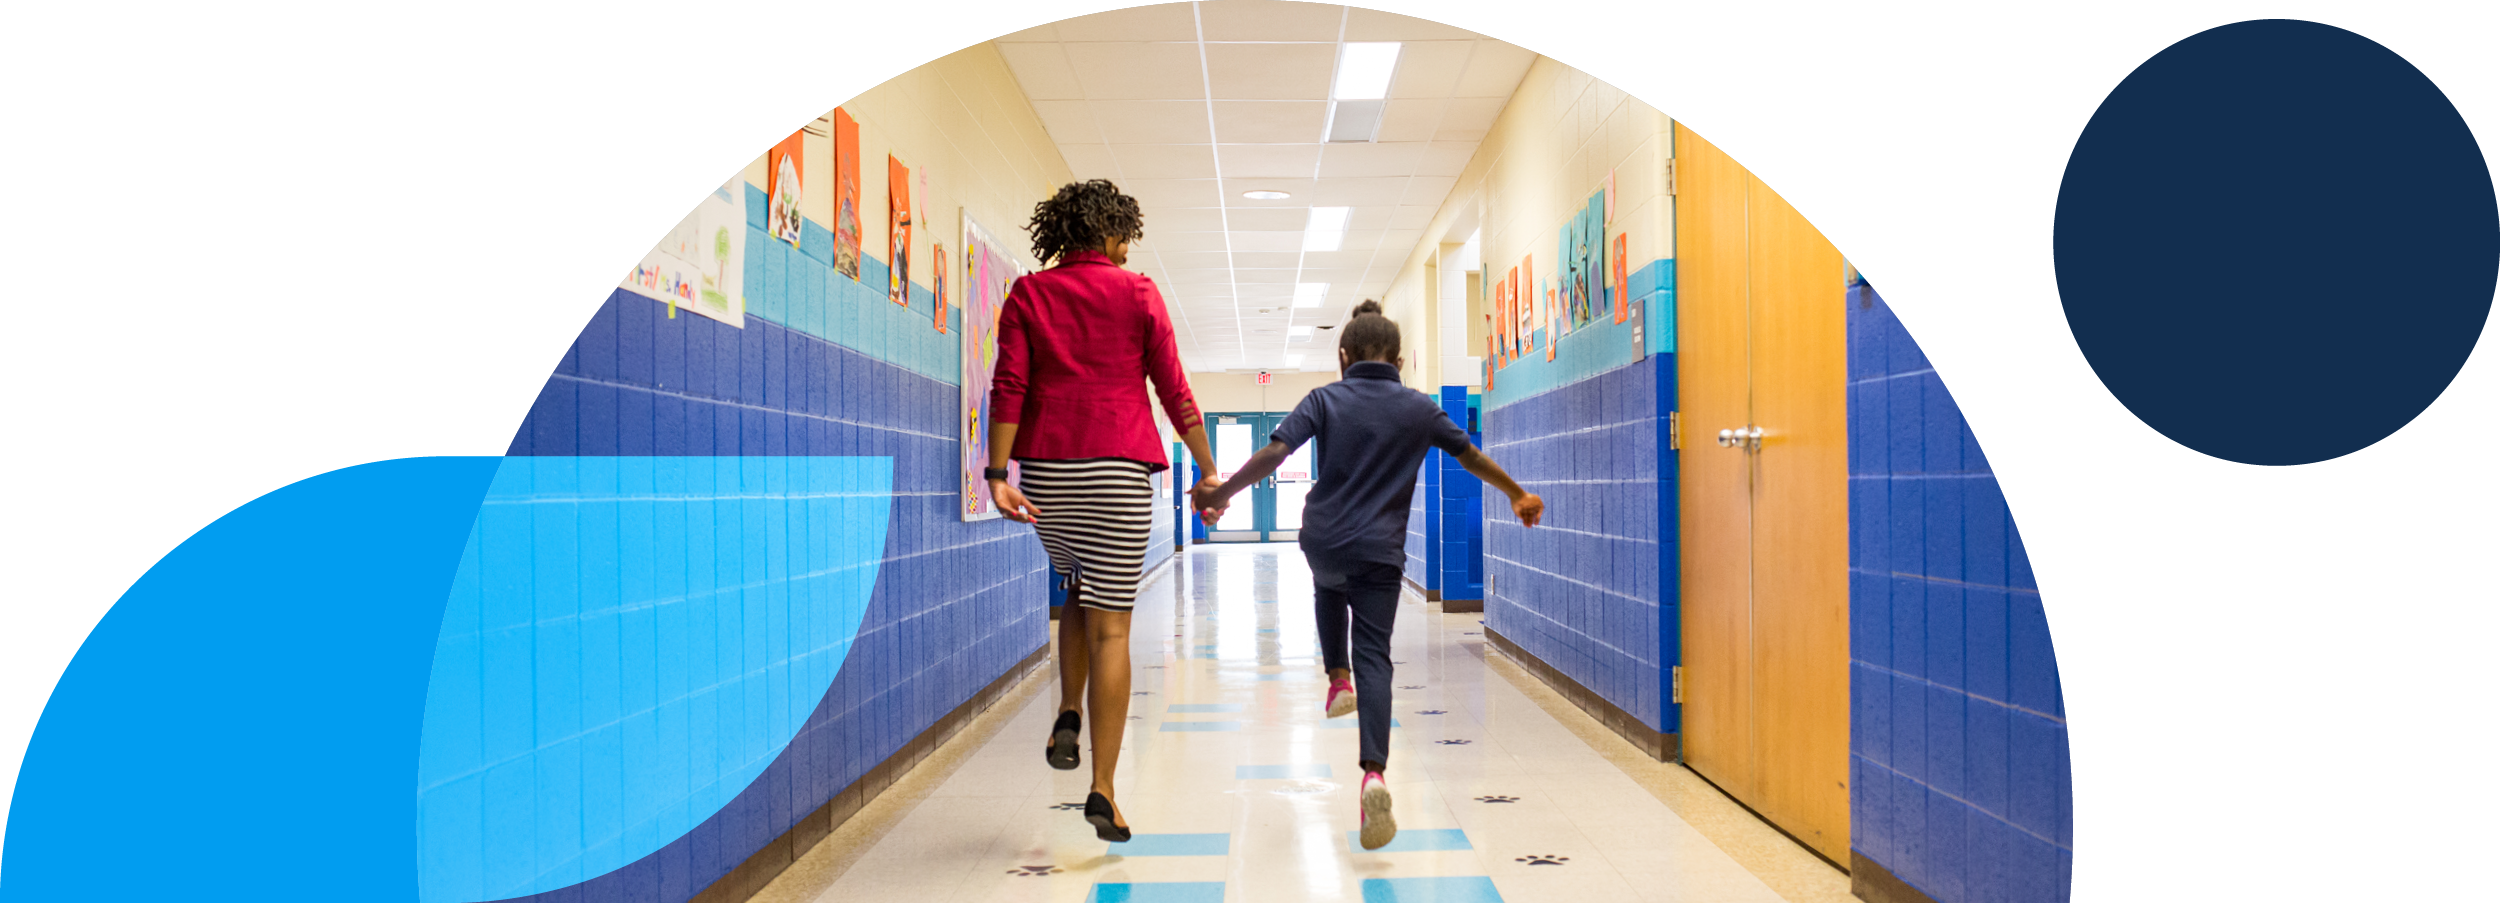 IUE website imagery — student and teacher skipping through hallway